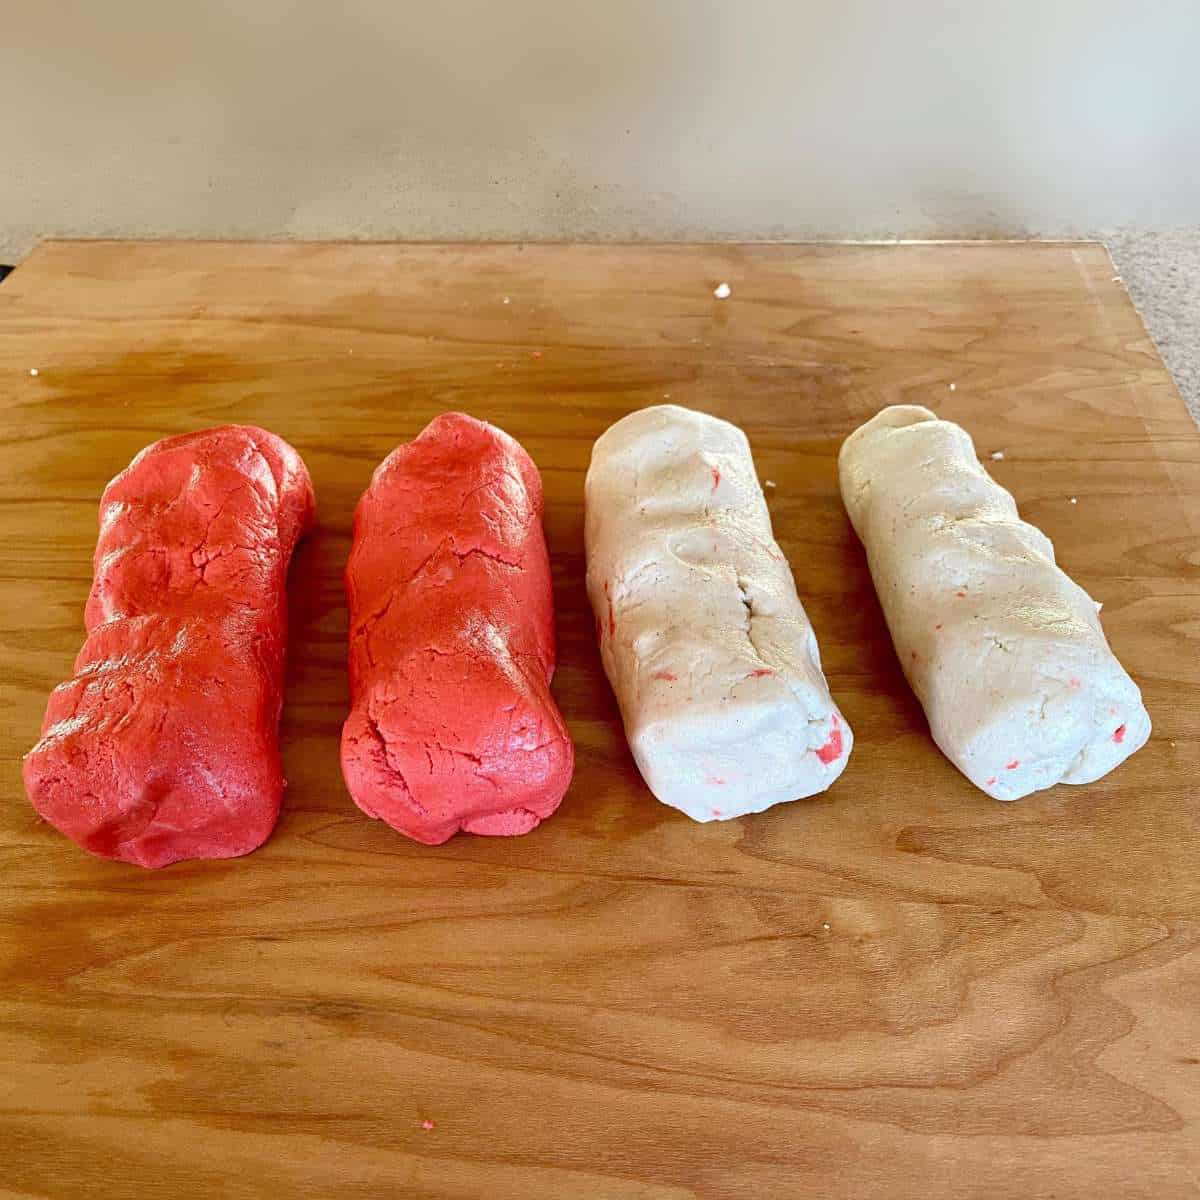 Logs of red and white dough.